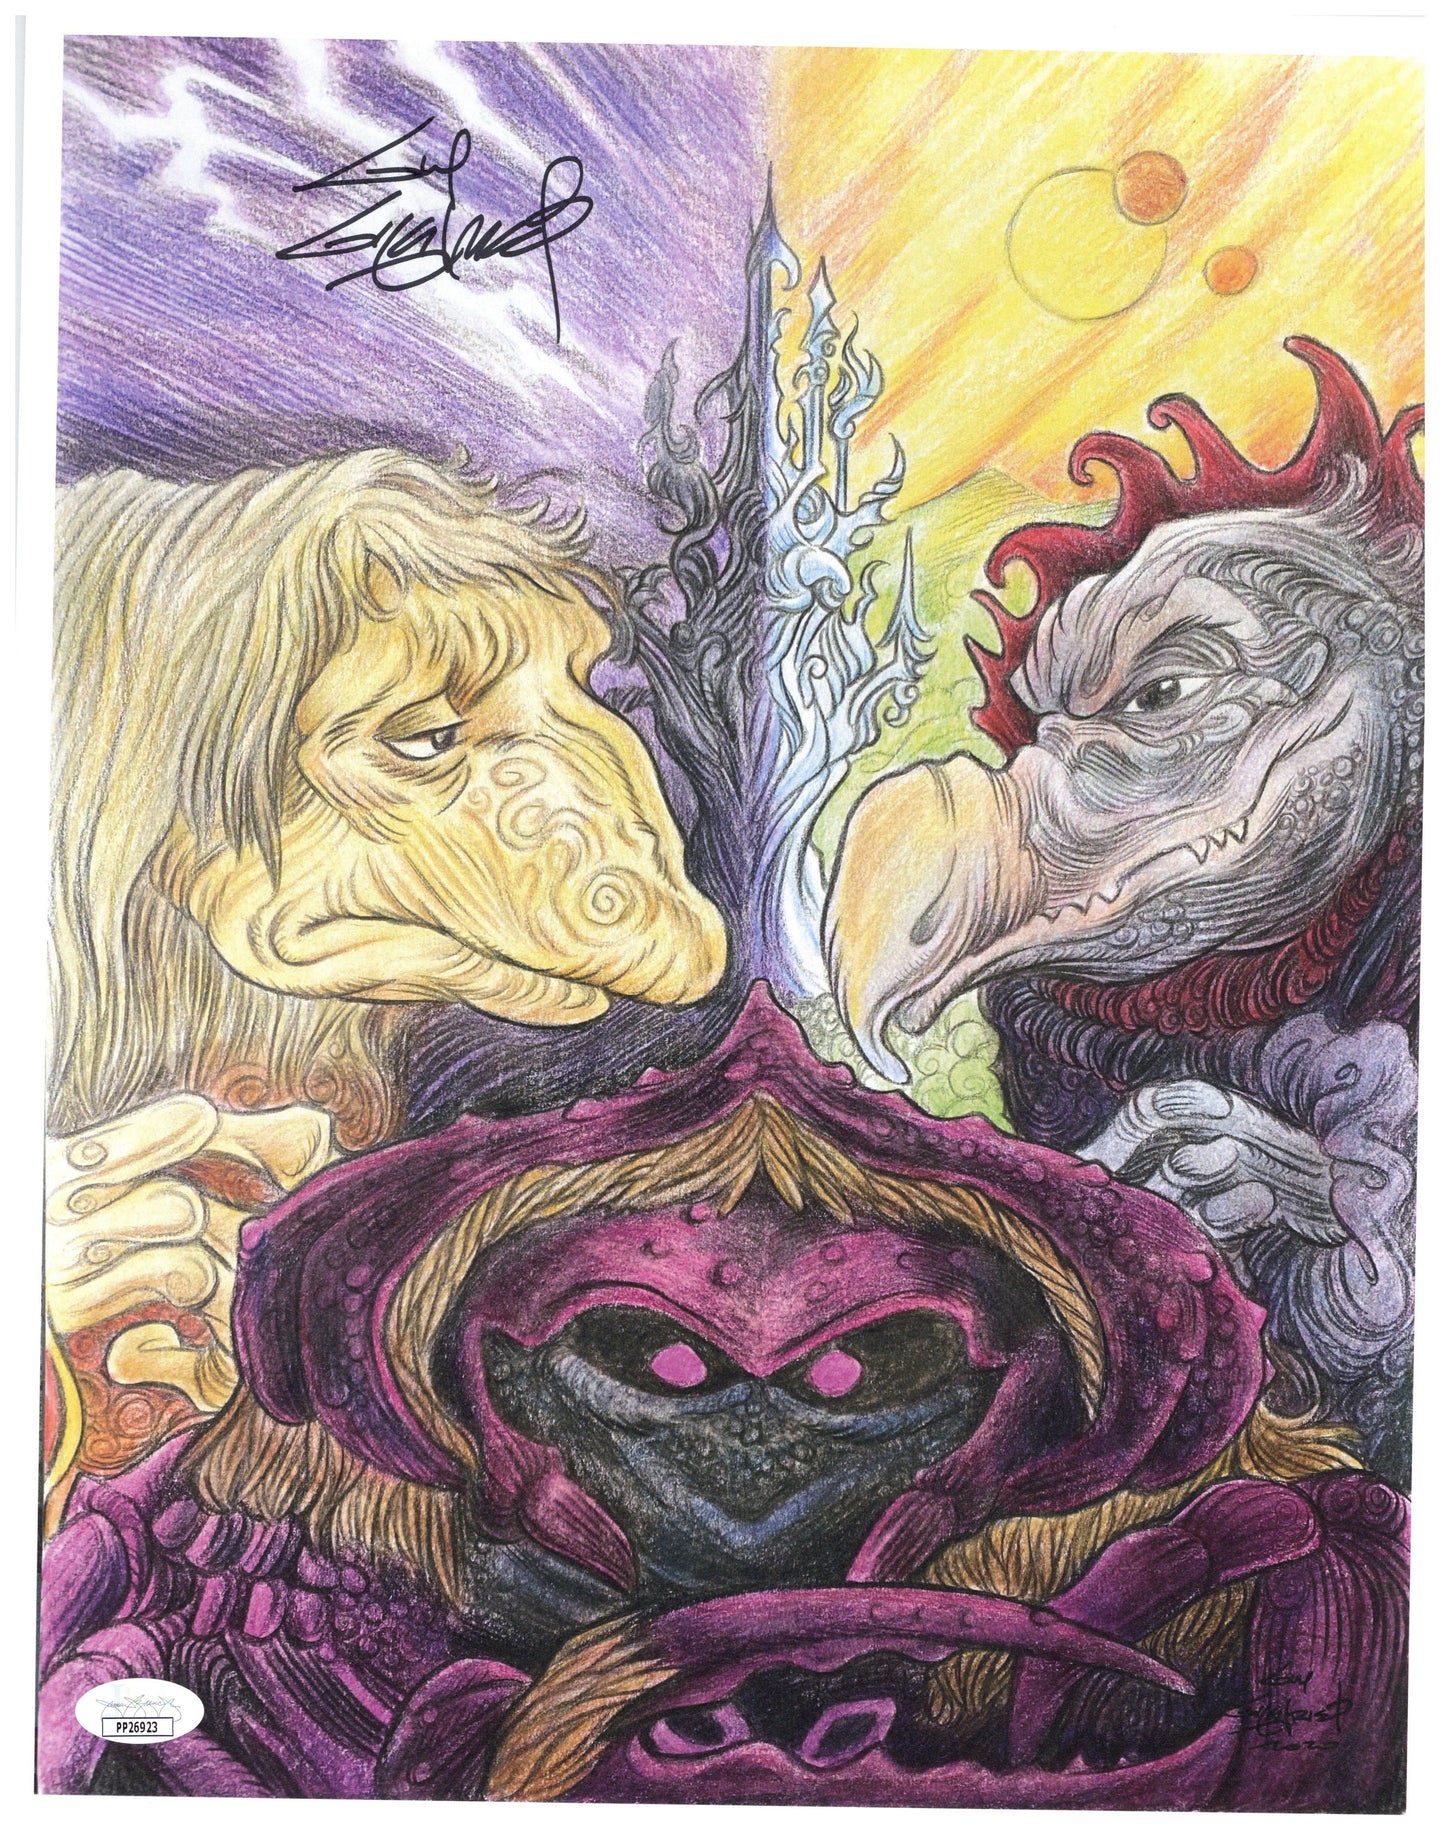 Dark Crystal #2 11x14 Art Print - Created by & Signed by Guy Gilchrist - Includes JSA COA